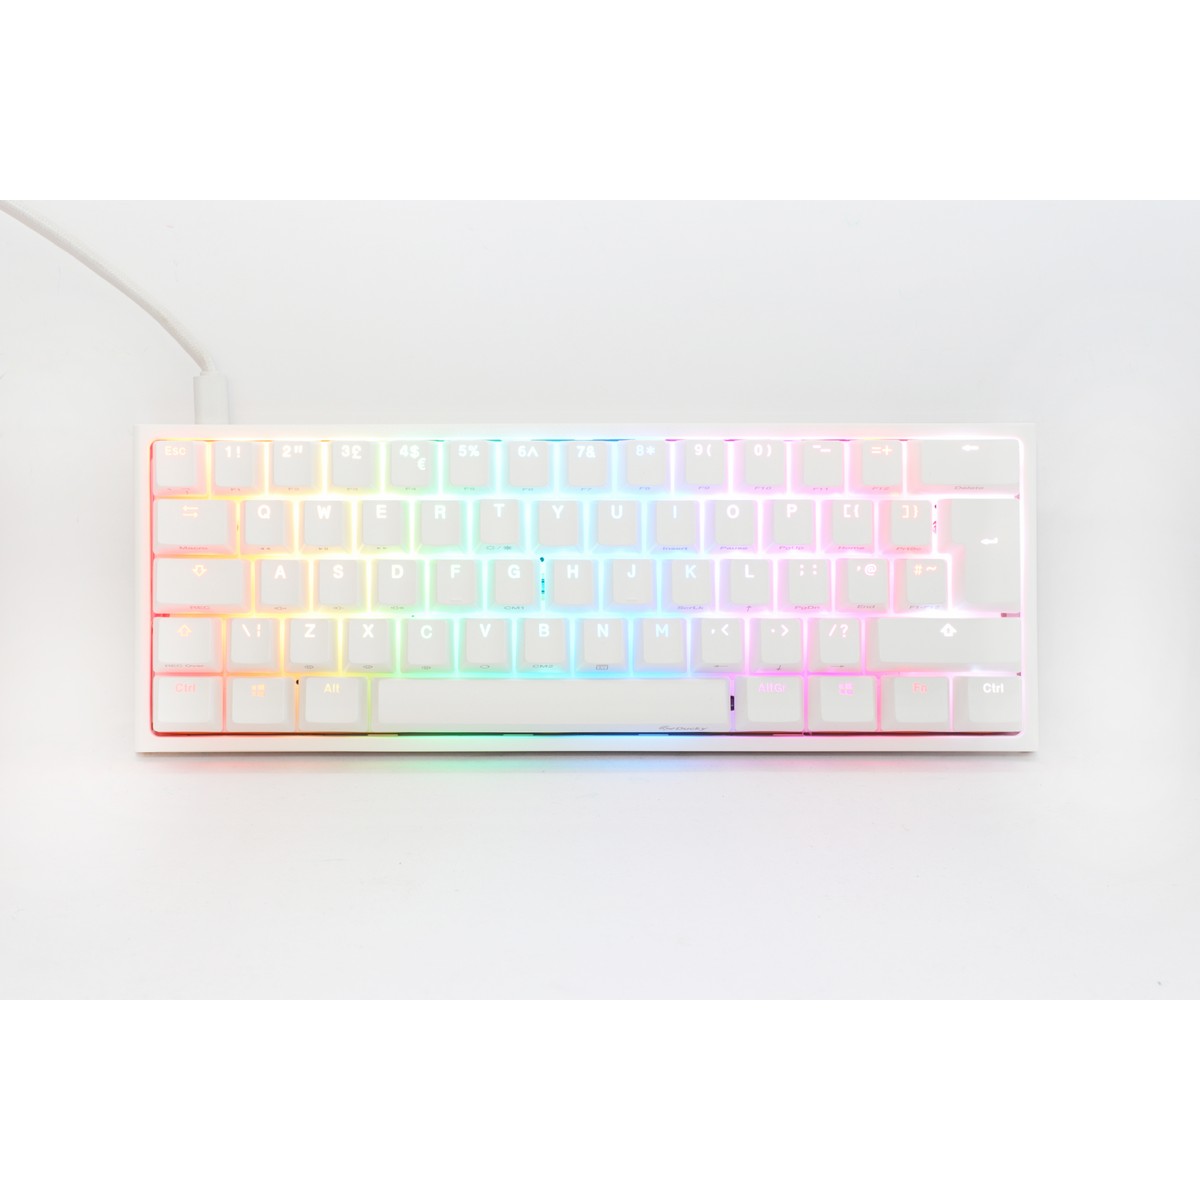 Ducky One 2 Pro Mini 60% Mechanical Gaming Keyboard MX Cherry Red Switch White Frame - UK Layout